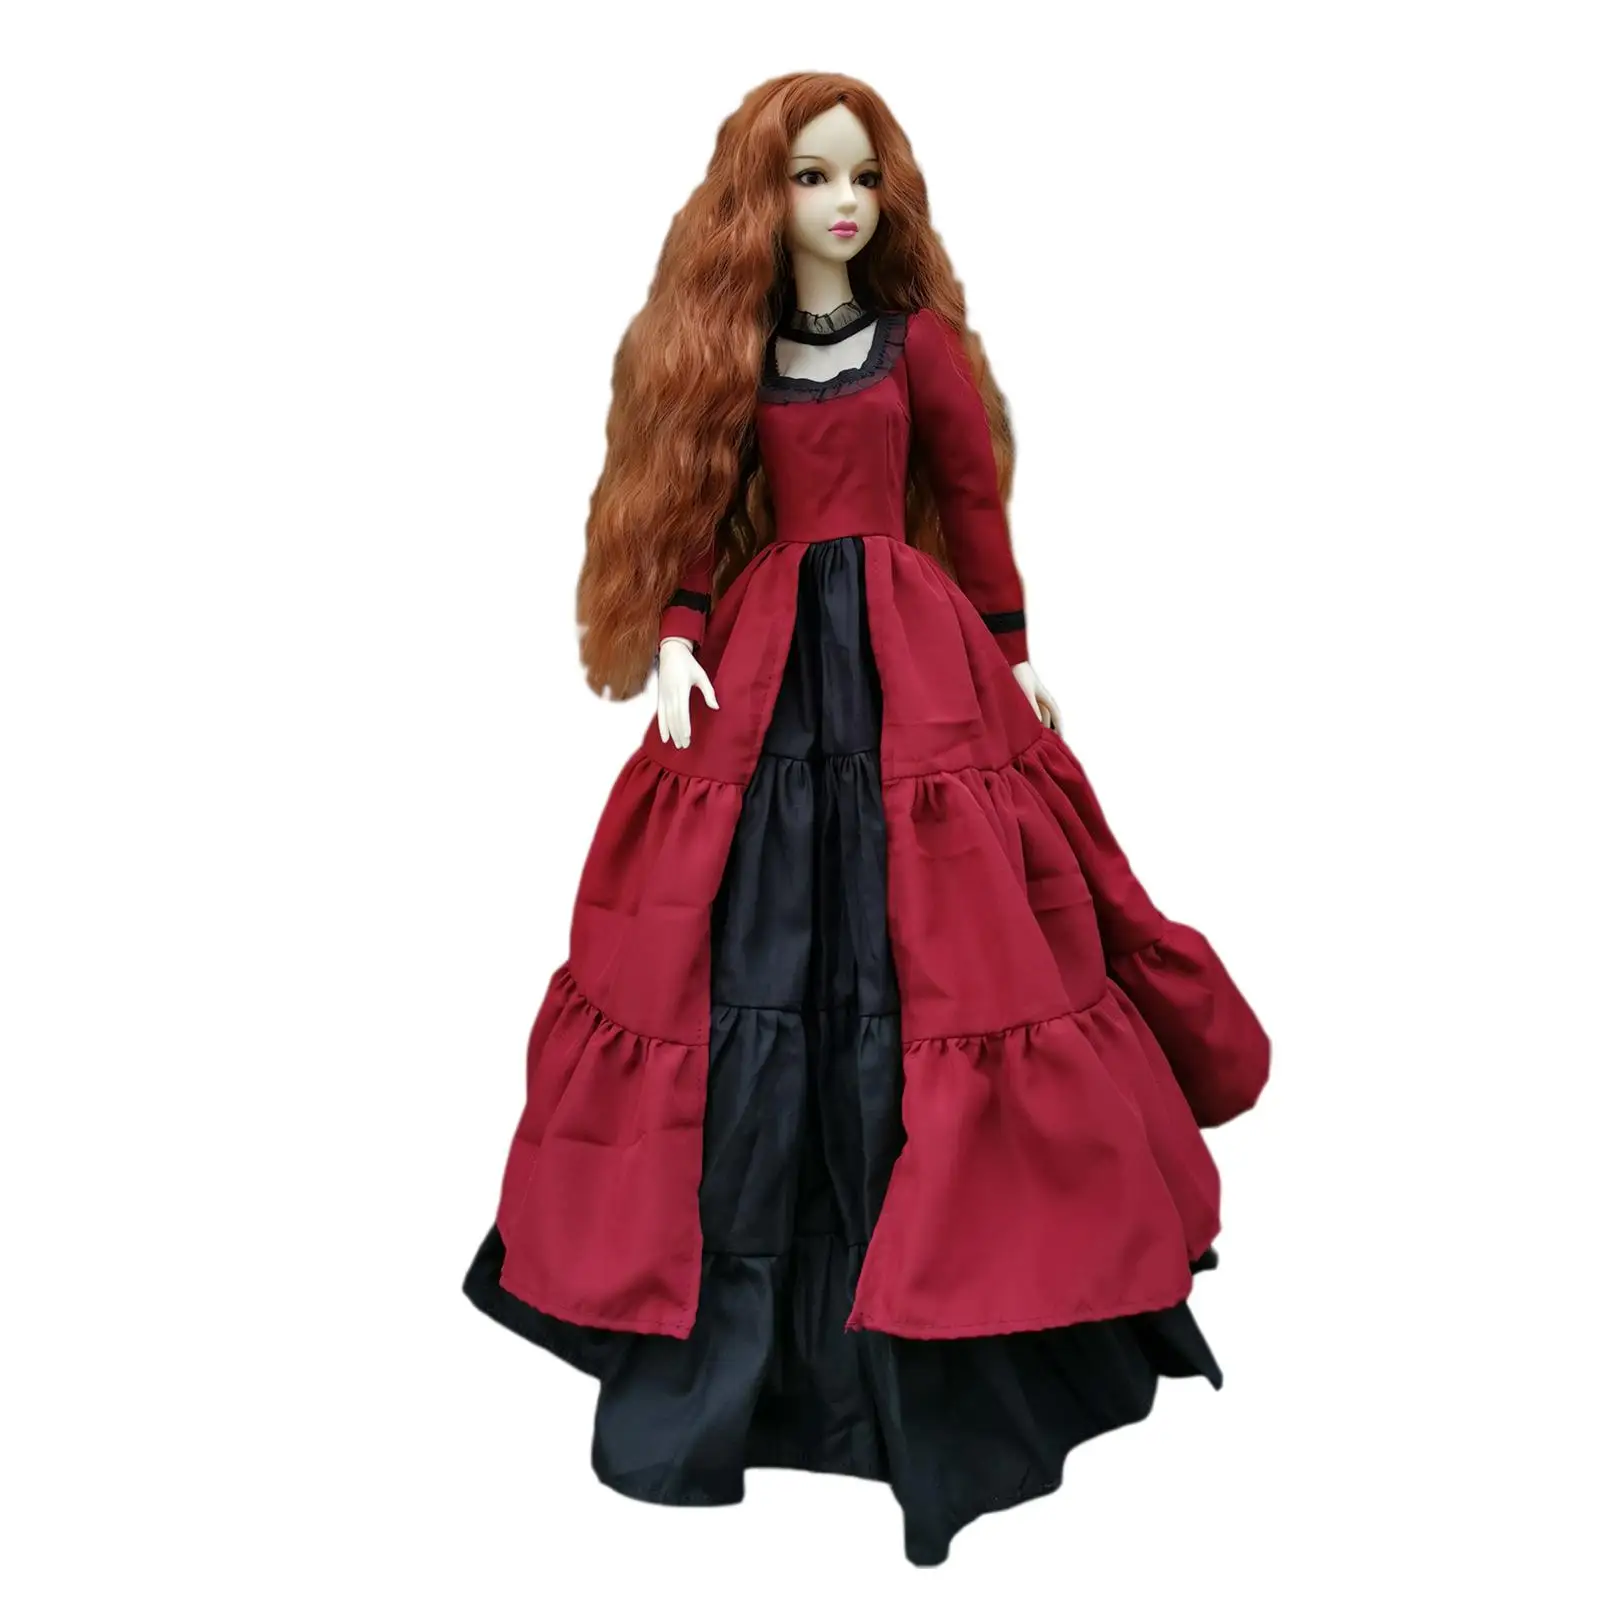 Ball Jointed Doll 1/3 Dolls with Beautiful Outfit and Doll Accessories Princess Doll Fashion 24 inch Doll for Girls